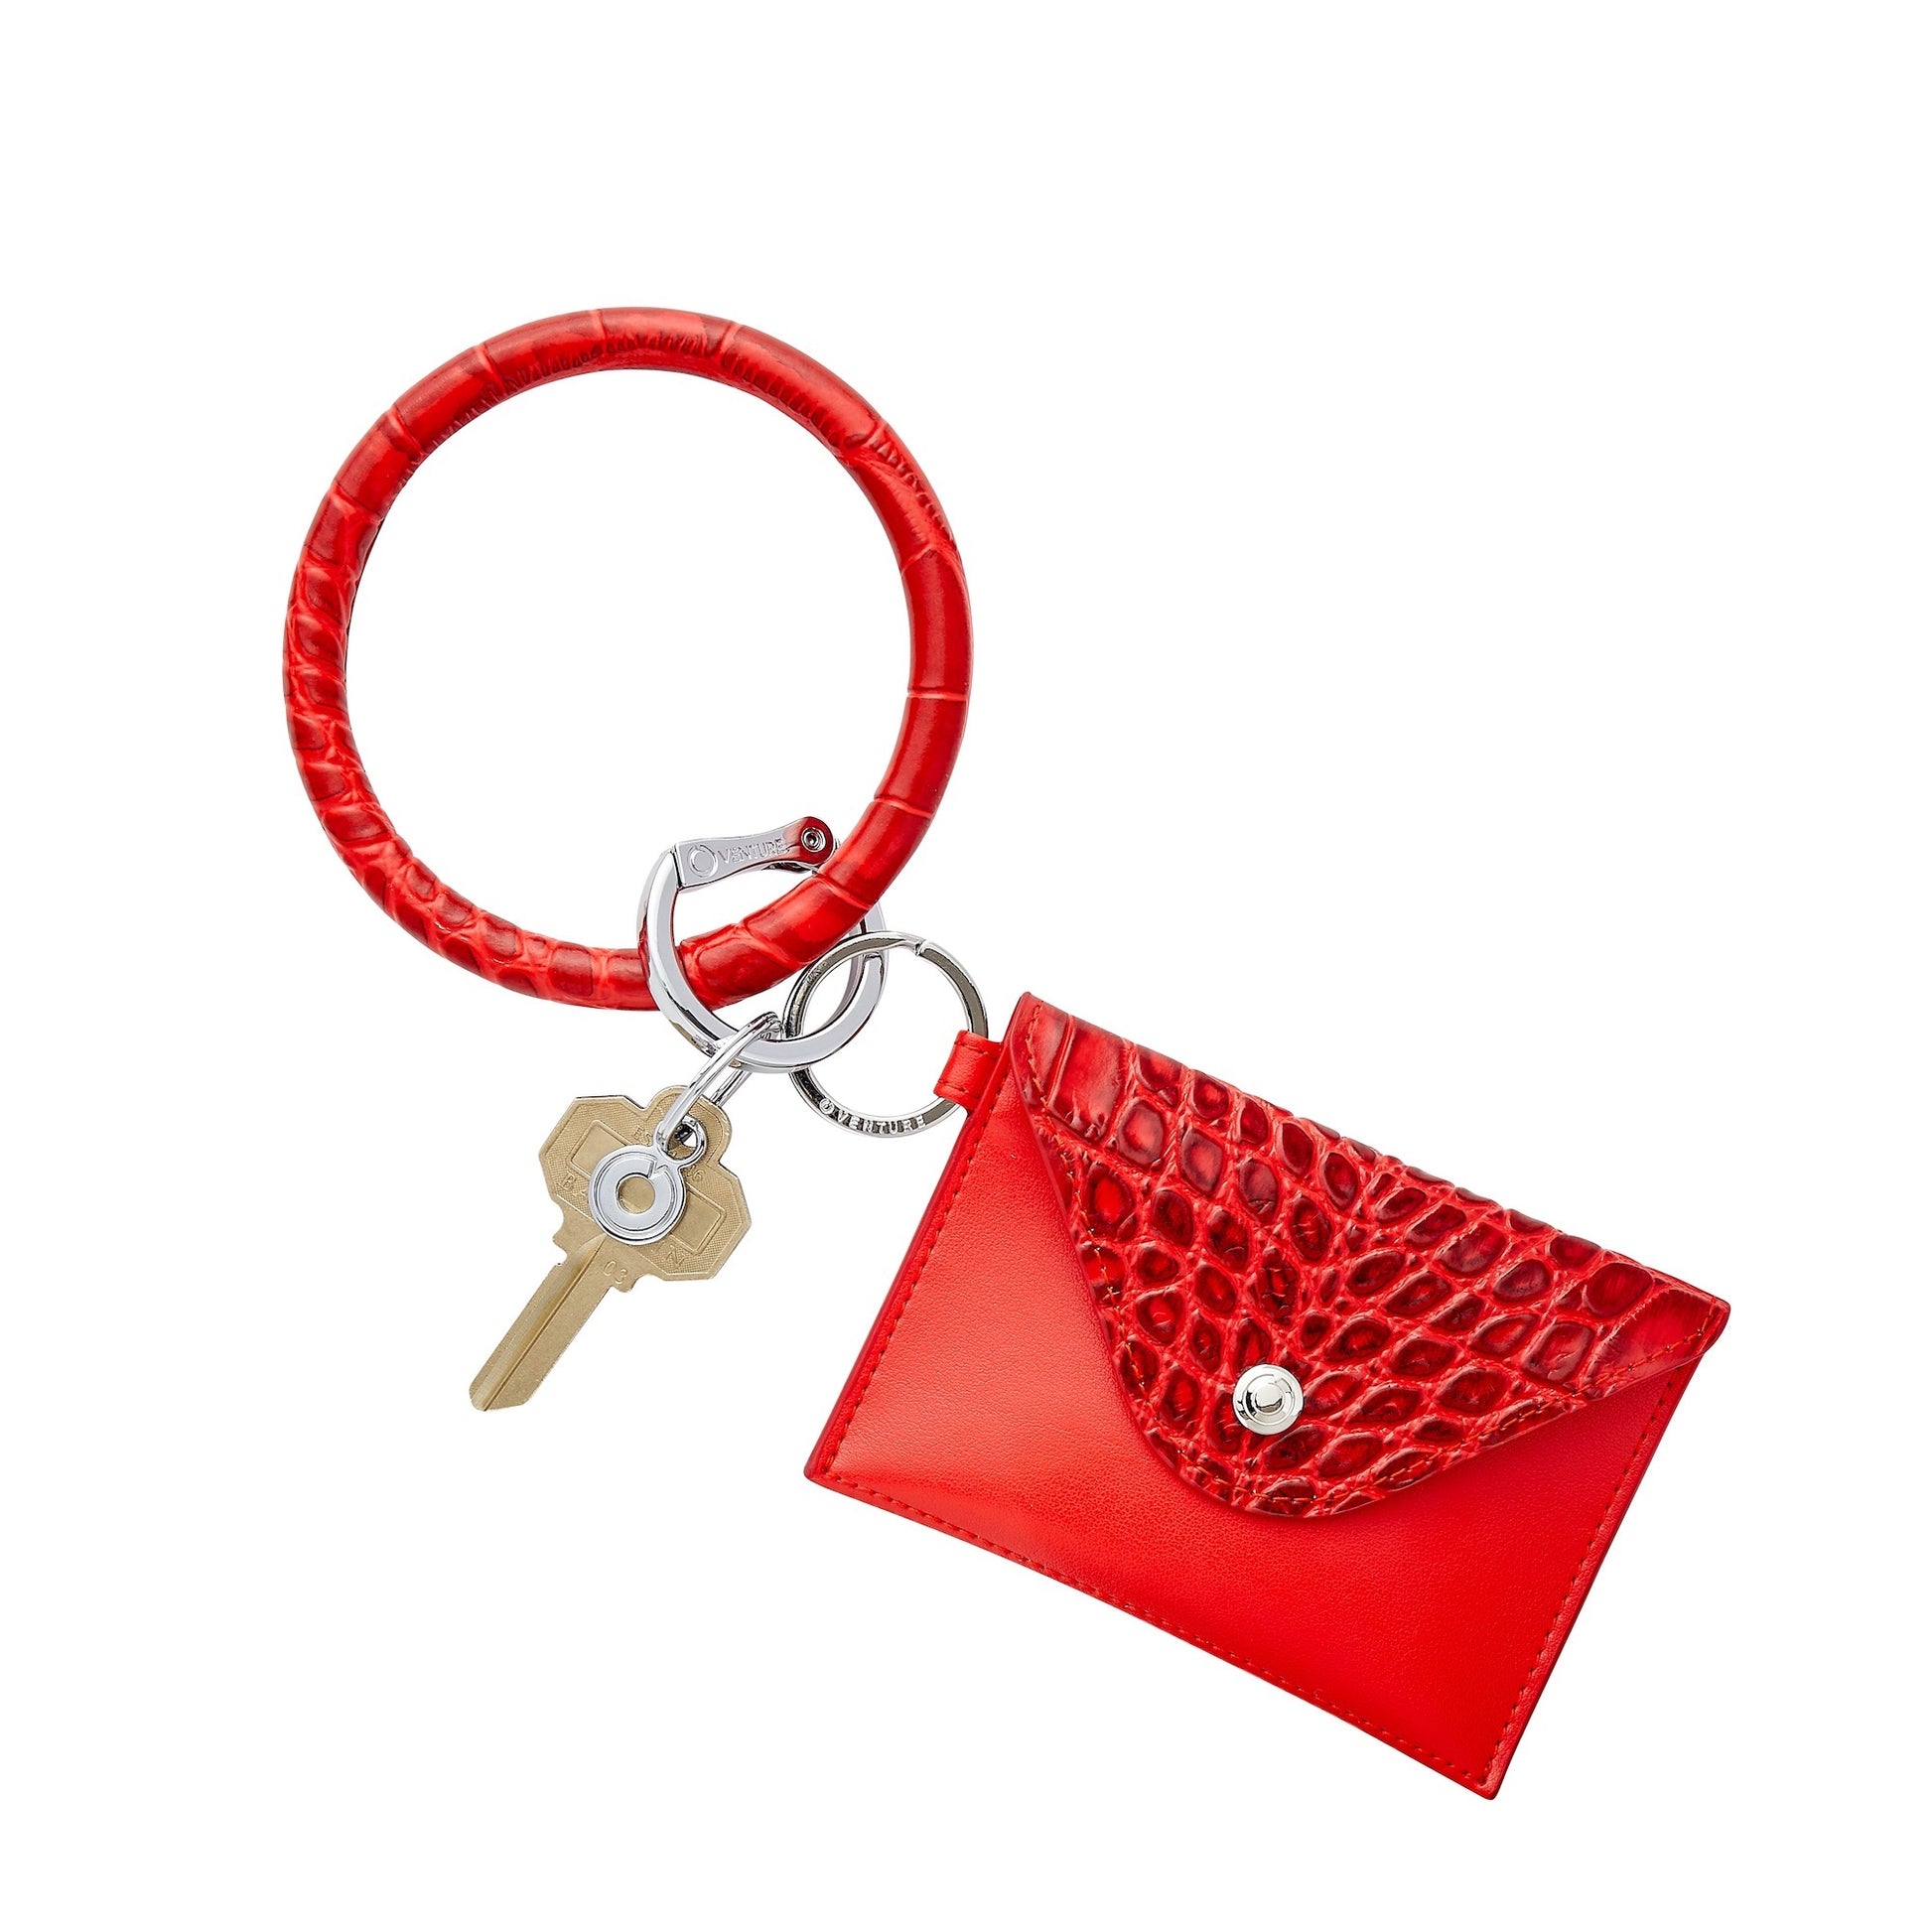 Cherry On Top Croc-Embossed - Mini Envelope Wallet - Oventure attached to the Big O Key Ring in Red croc embossed leather